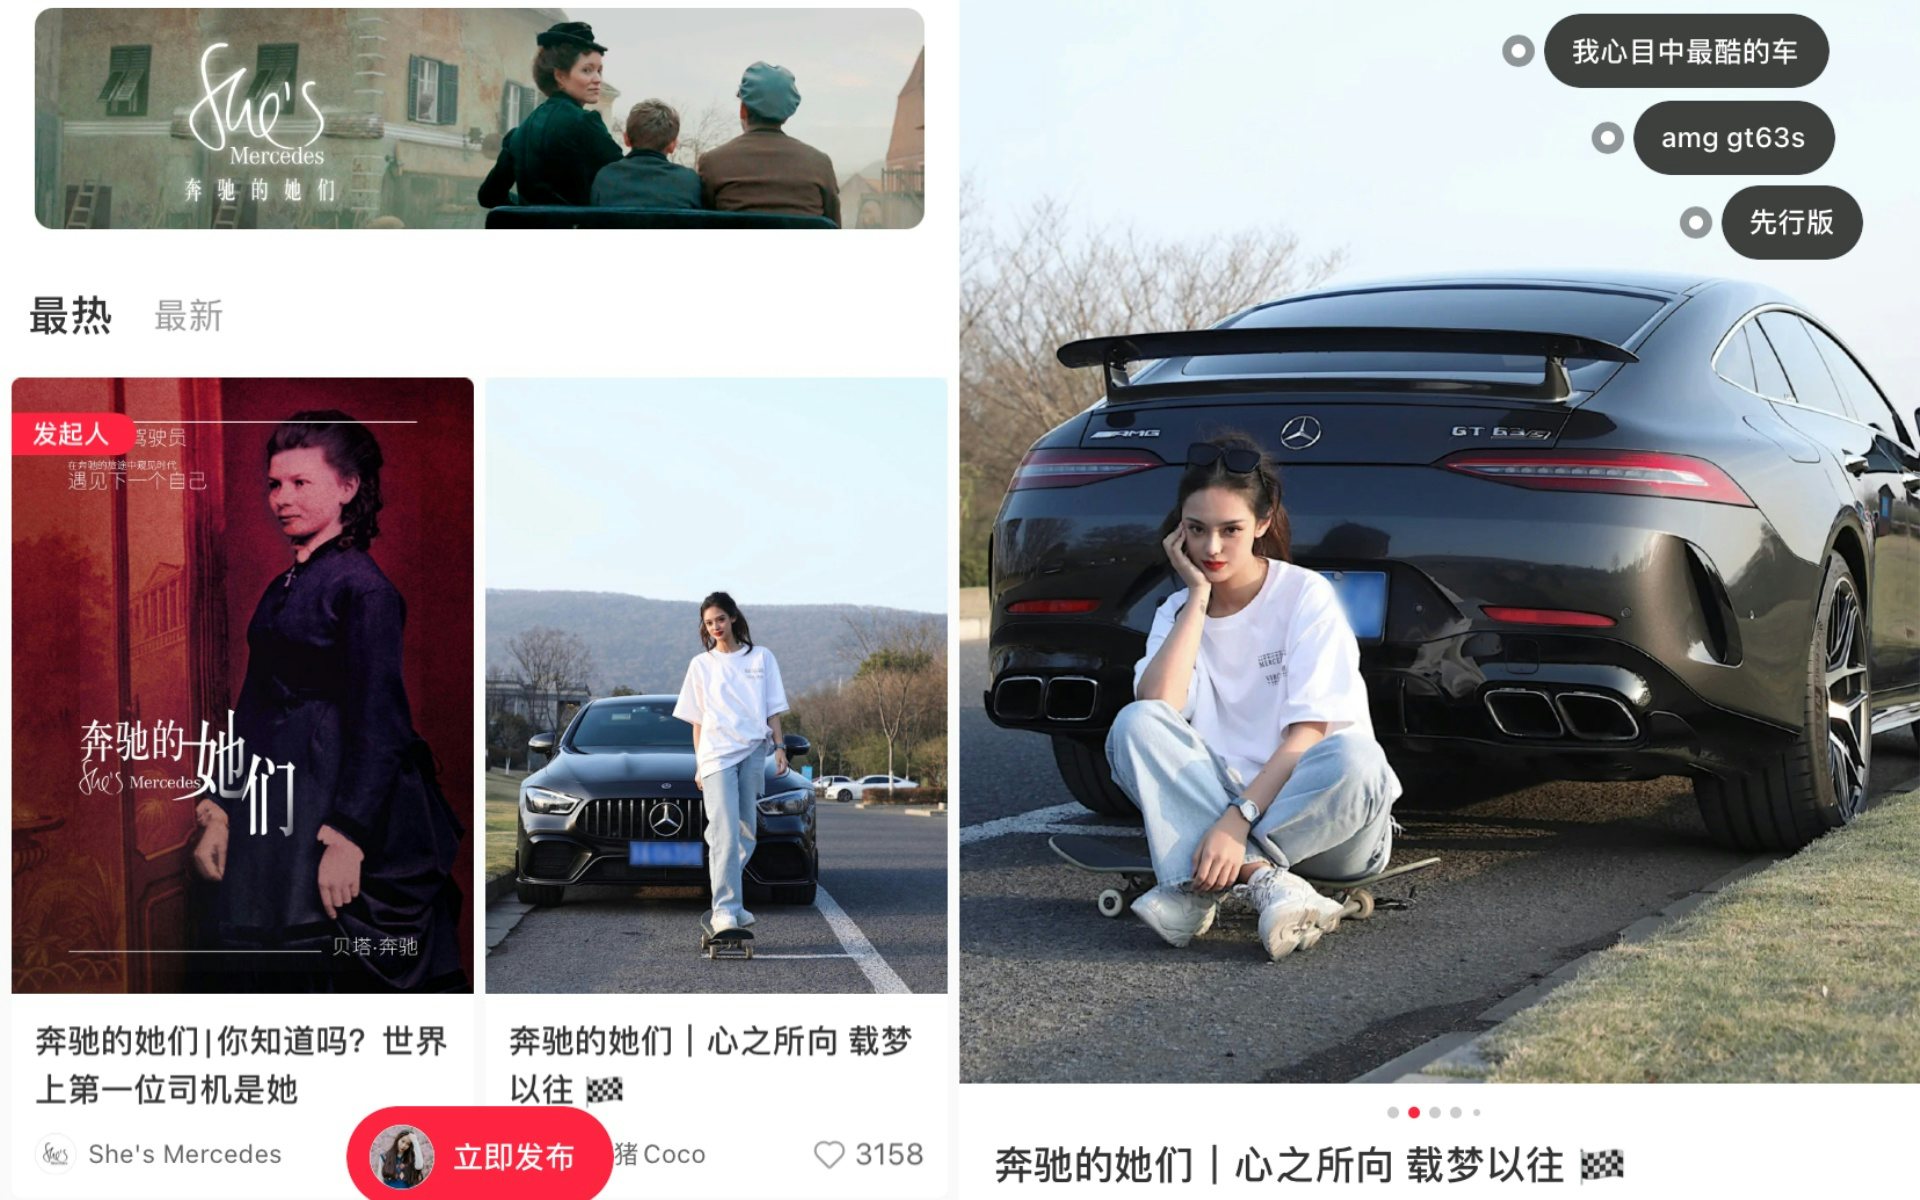 The German luxury automaker opted to host its International Women’s Day edition of “She’s Mercedes” on the social lifestyle platform Xiaohongshu. Photo: Courtesy Mercedes Benz